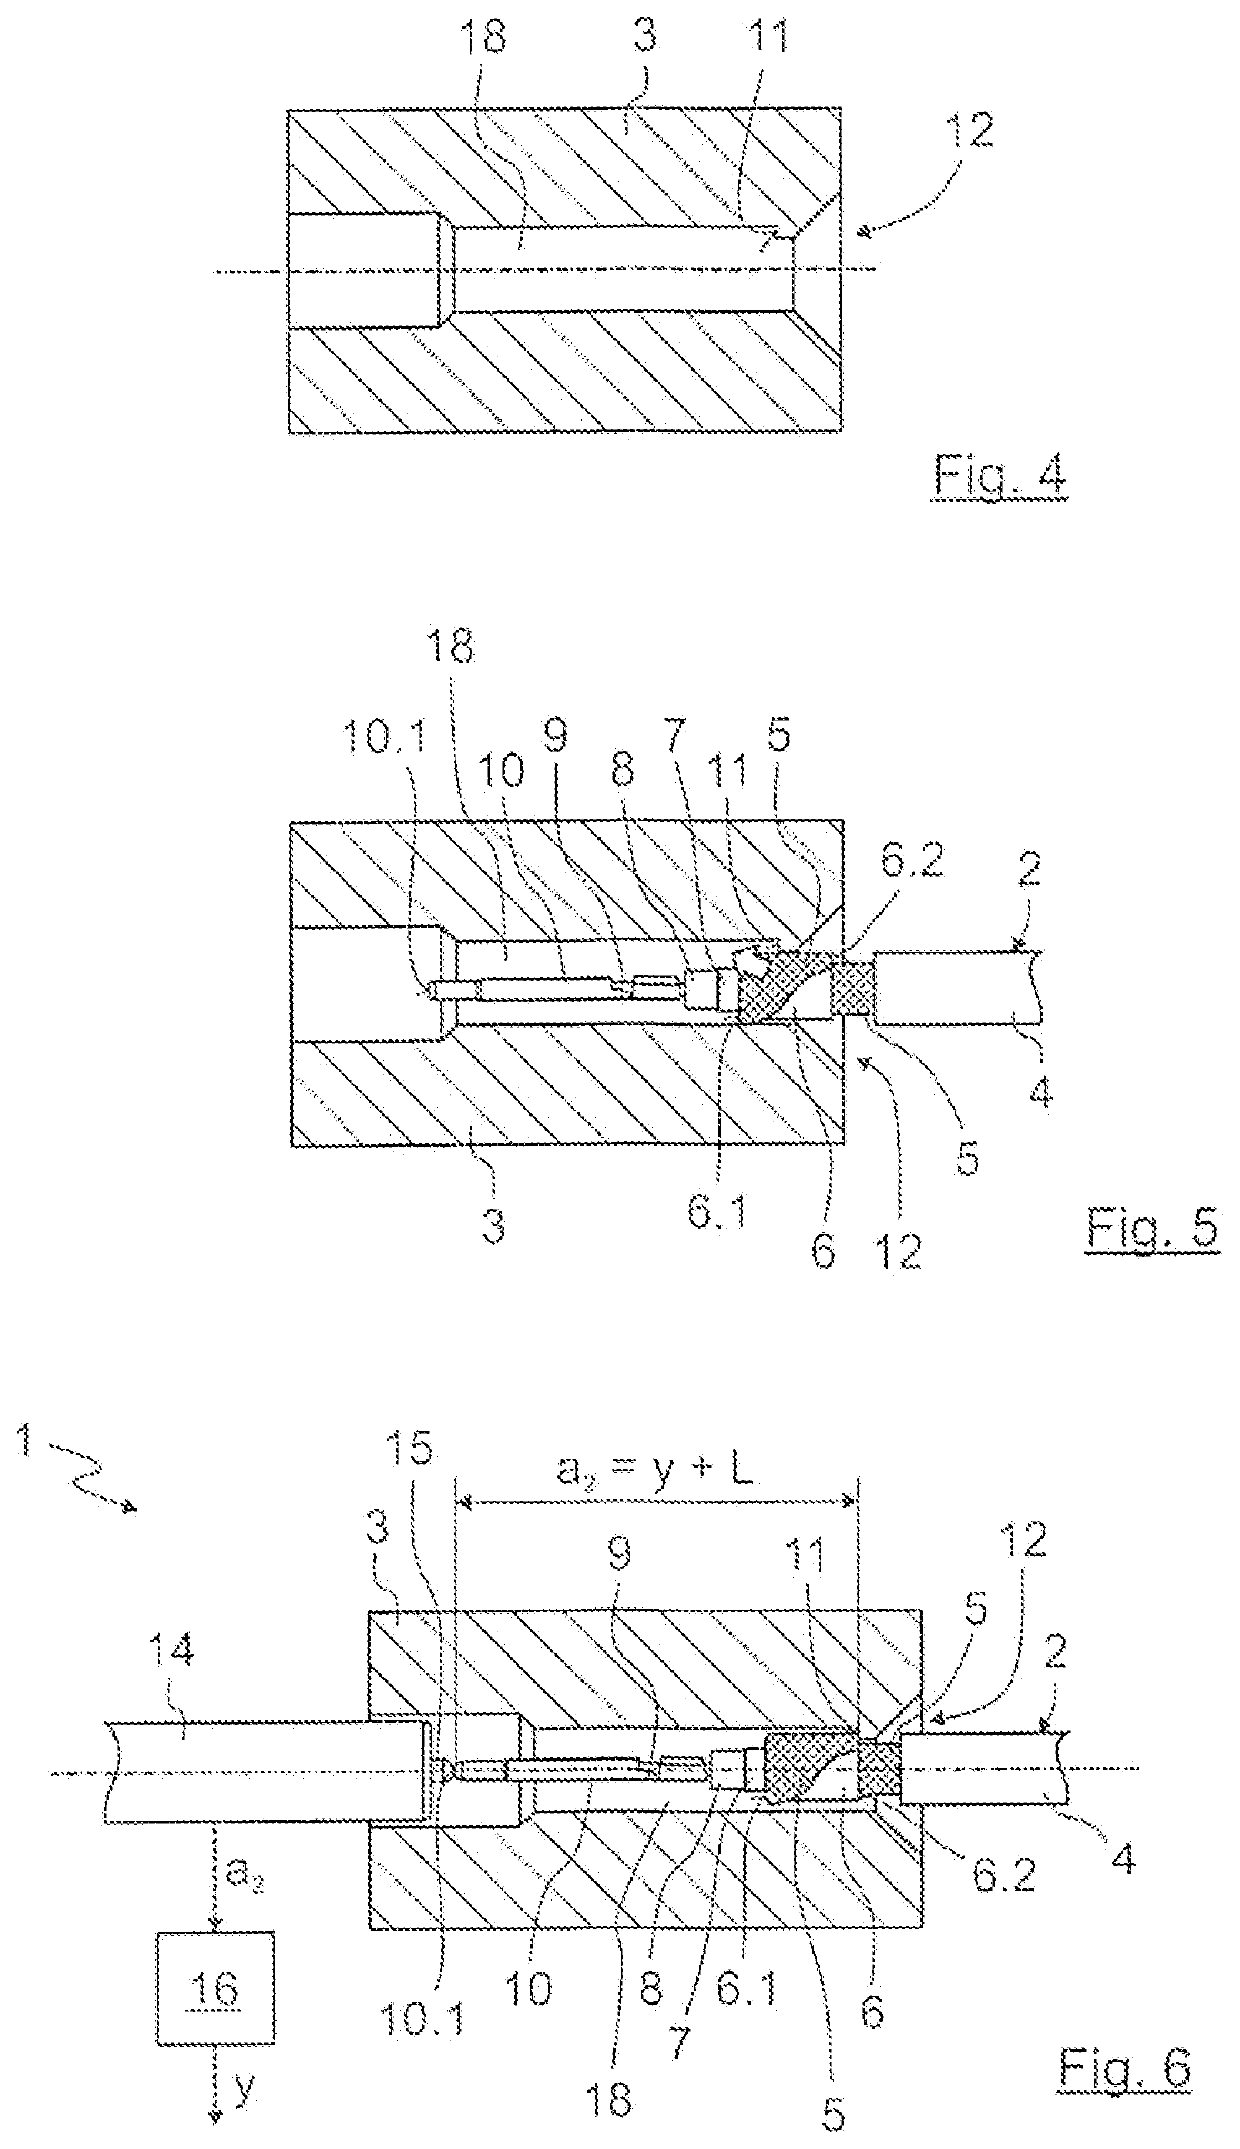 Measurement and positioning methods and arrangements for assembling an electrical cable